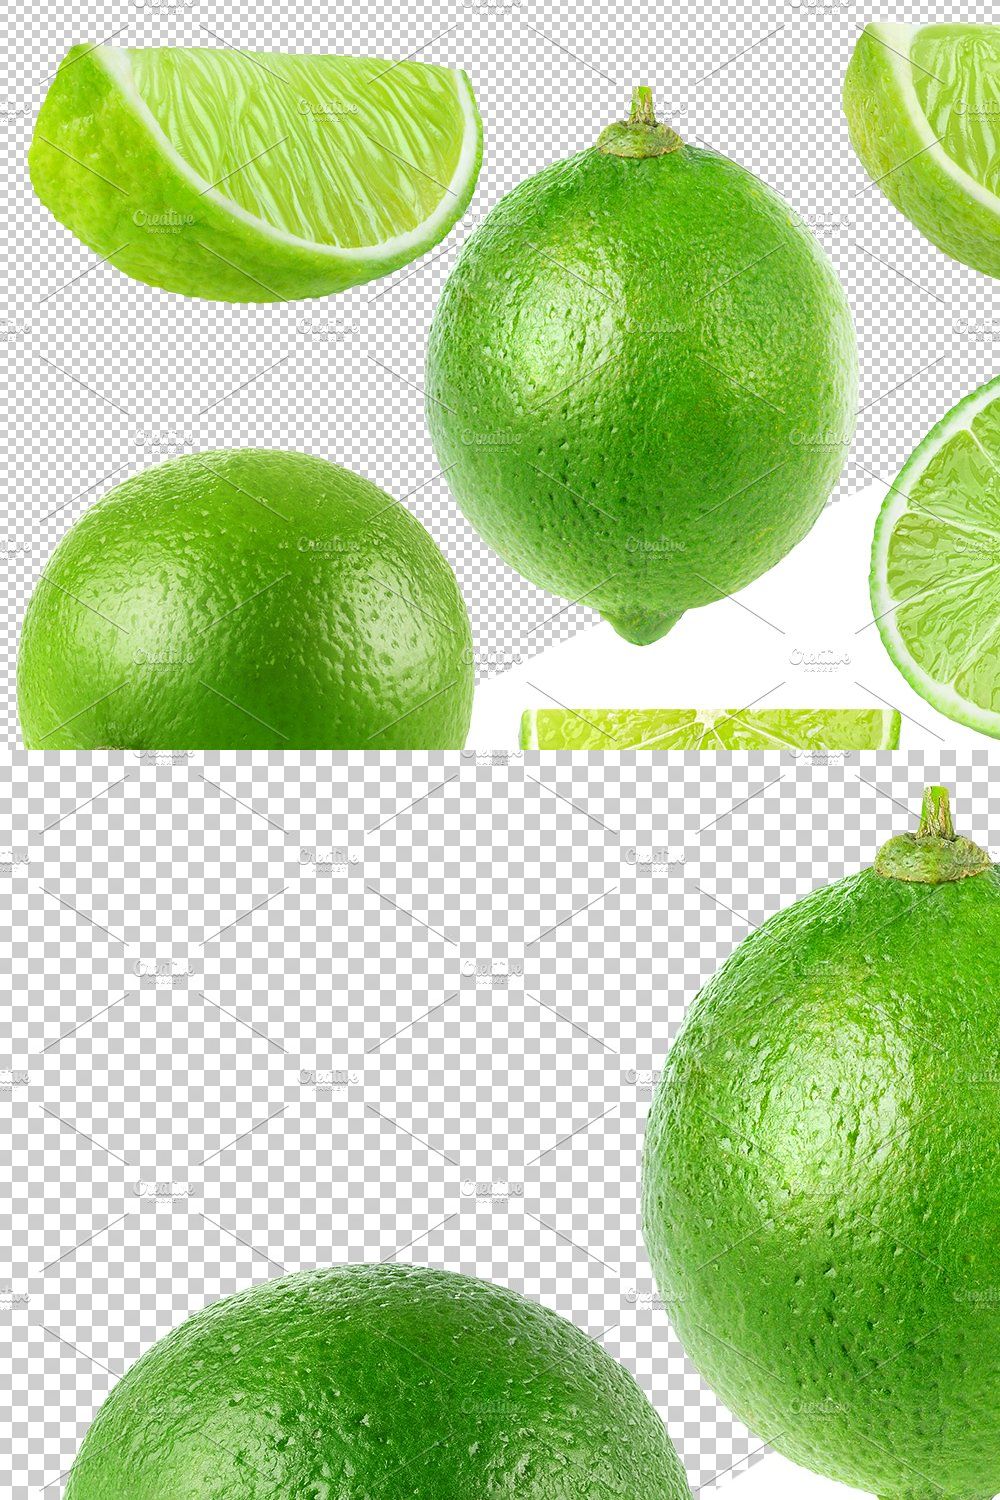 Limes collection pinterest preview image.